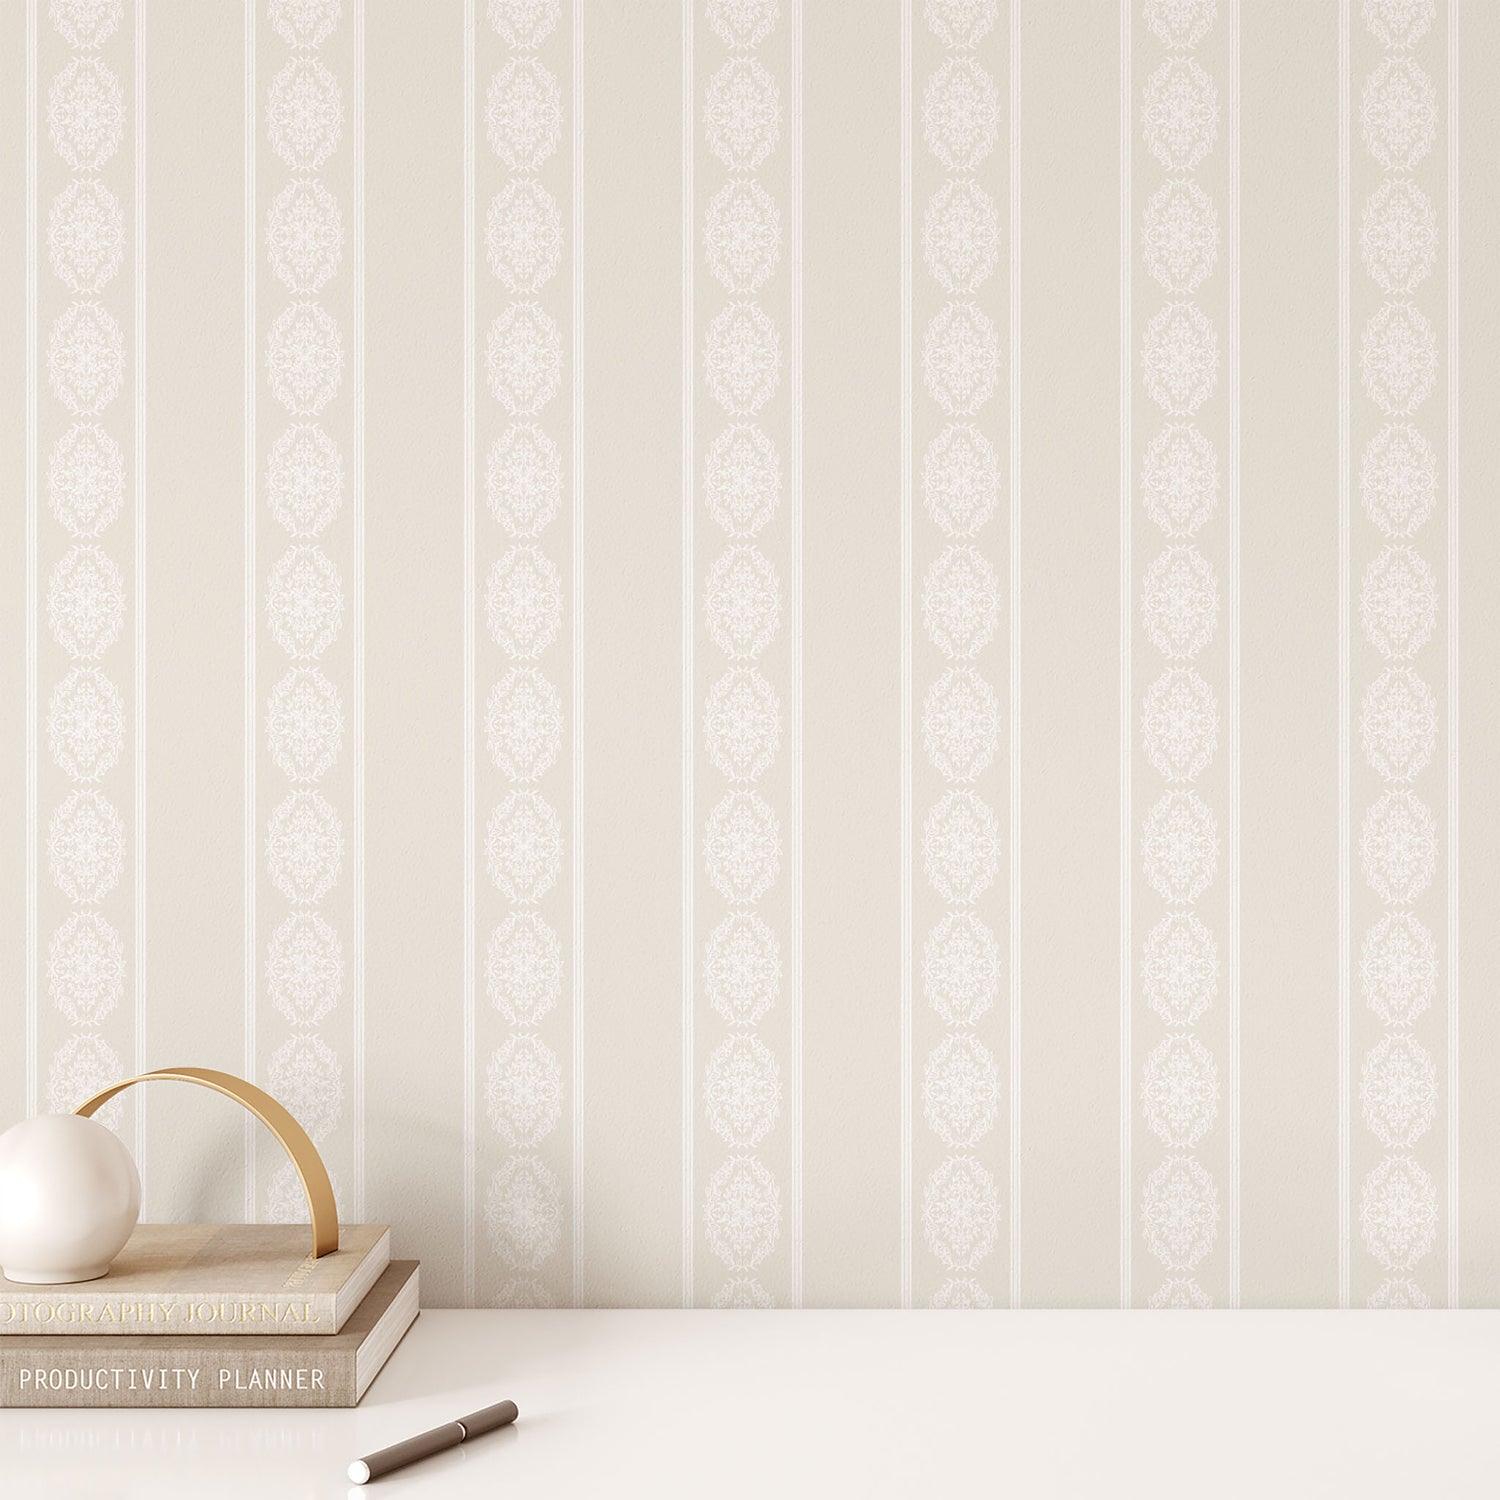 Upgrade your home decor with Milton Wallpaper. Its high-end look and stunning design will elevate any room. Made with top-quality materials, this wallpaper is the perfect choice for adding a touch of elegance to your space. Transform your walls and create a beautiful, sophisticated atmosphere shown in full size image.